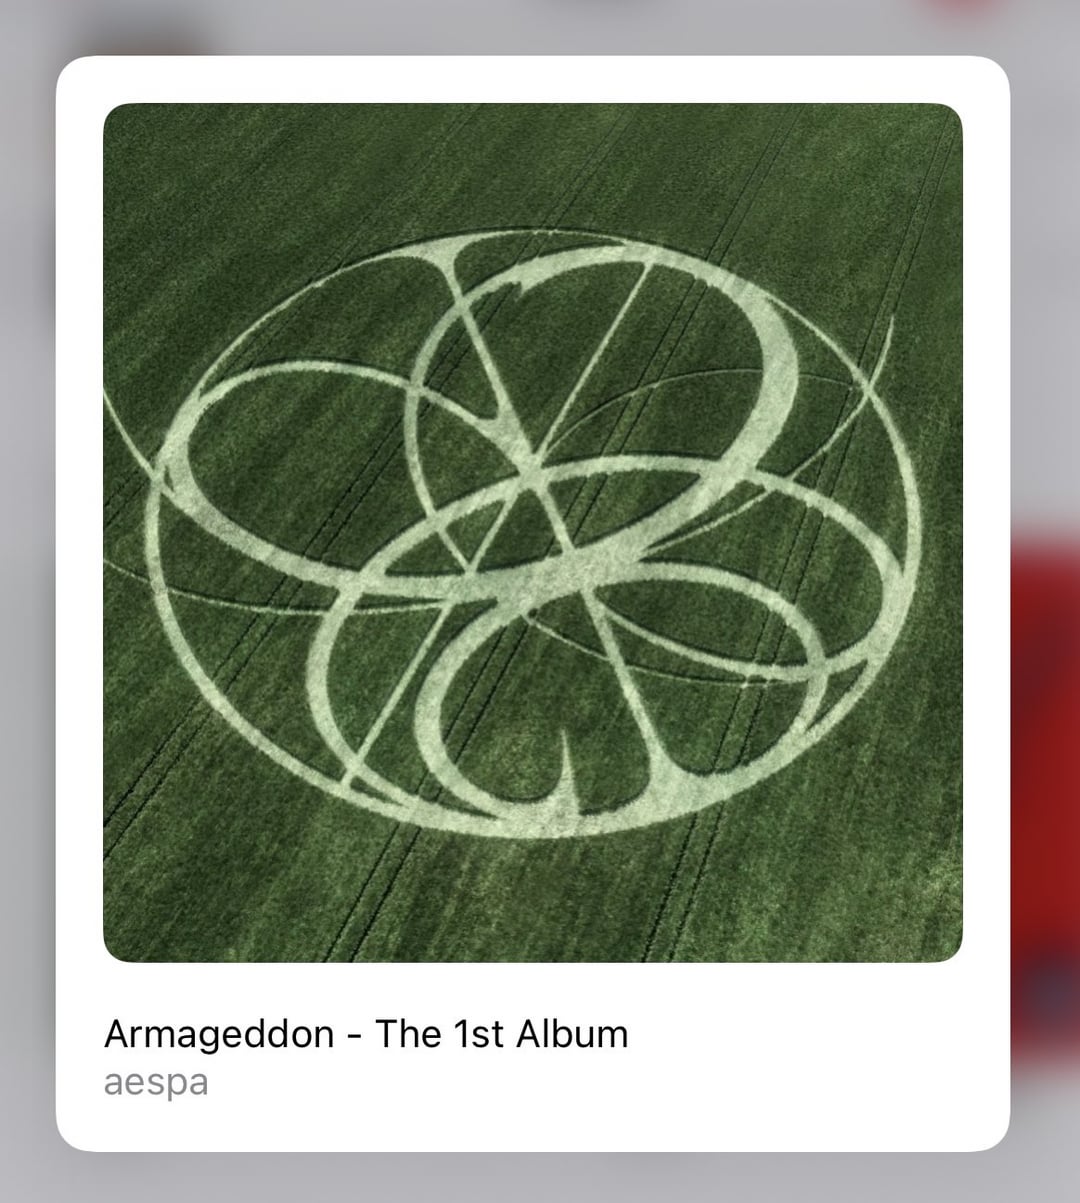 A crop circle as the digital cover for "Armageddon". Thoughts?